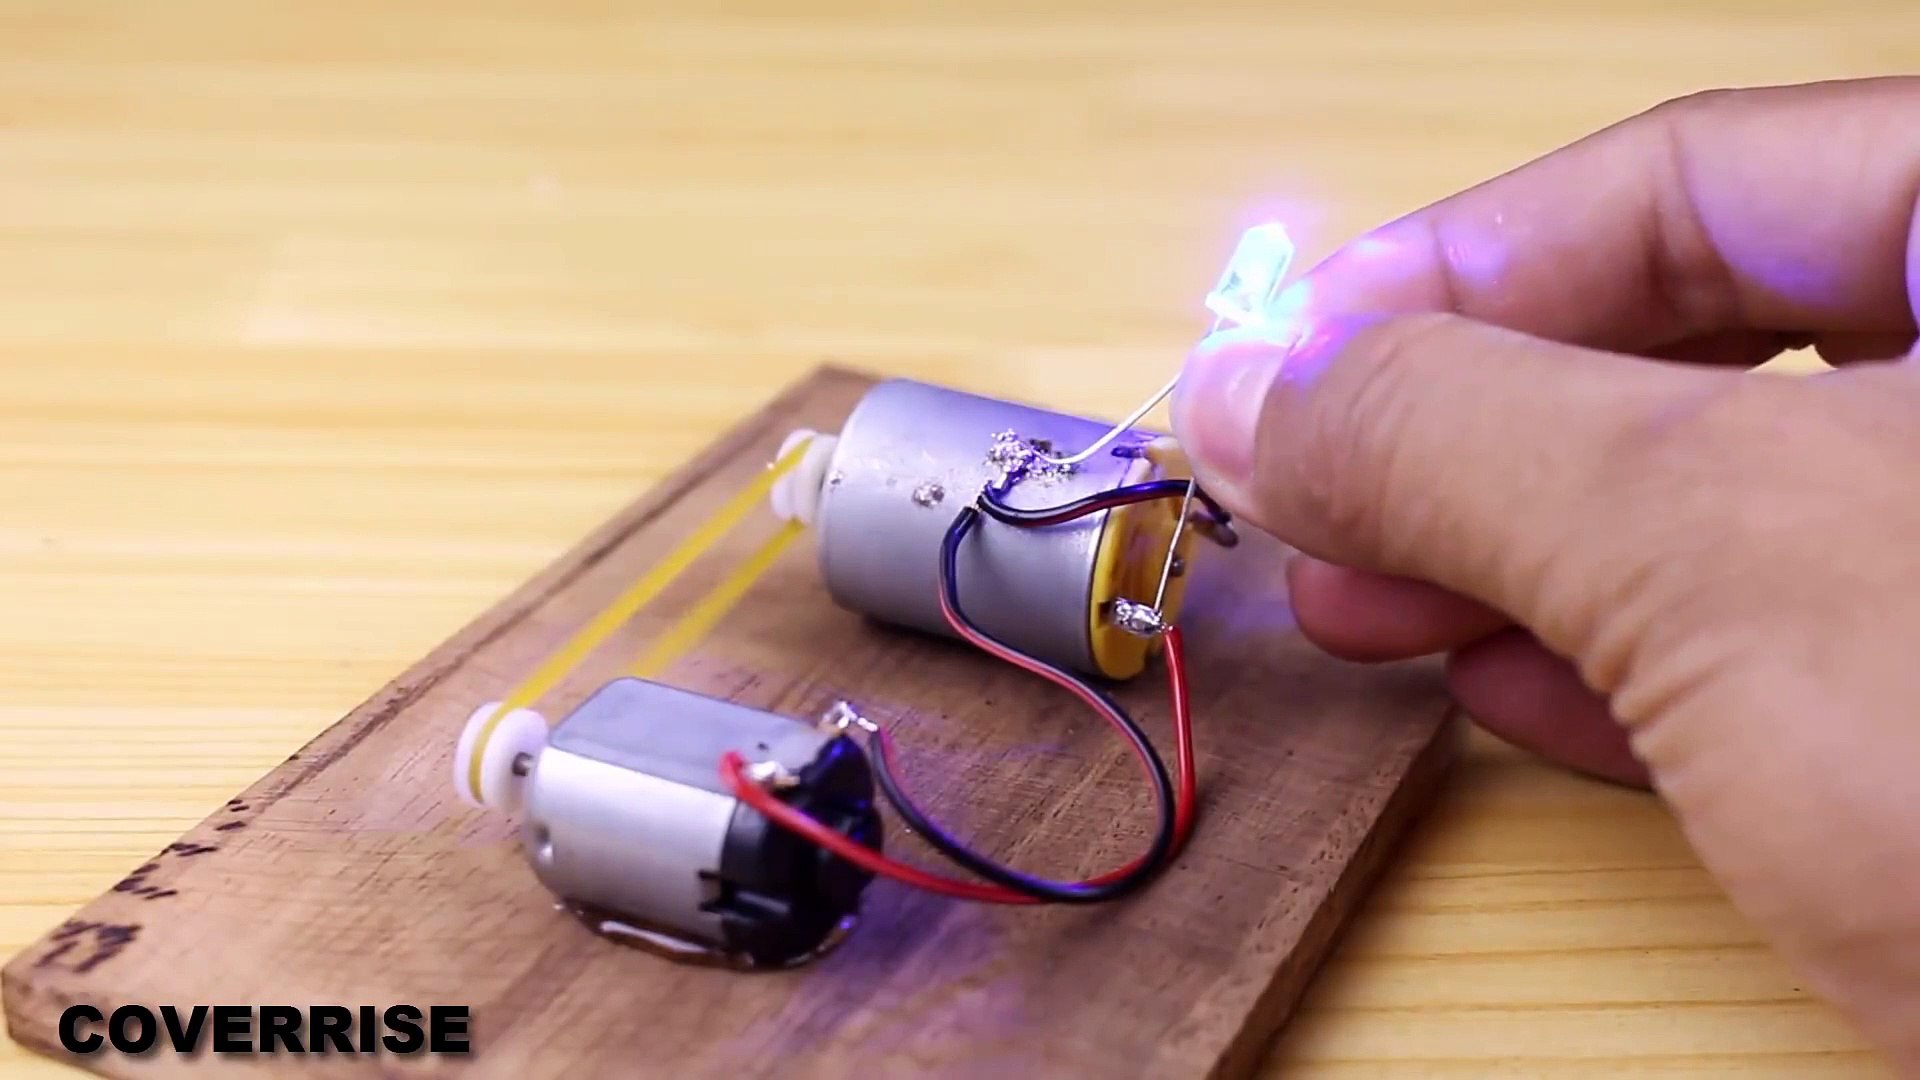 4 Ways to make a Free Energy Mobile Phone Charger - فيديو Dailymotion